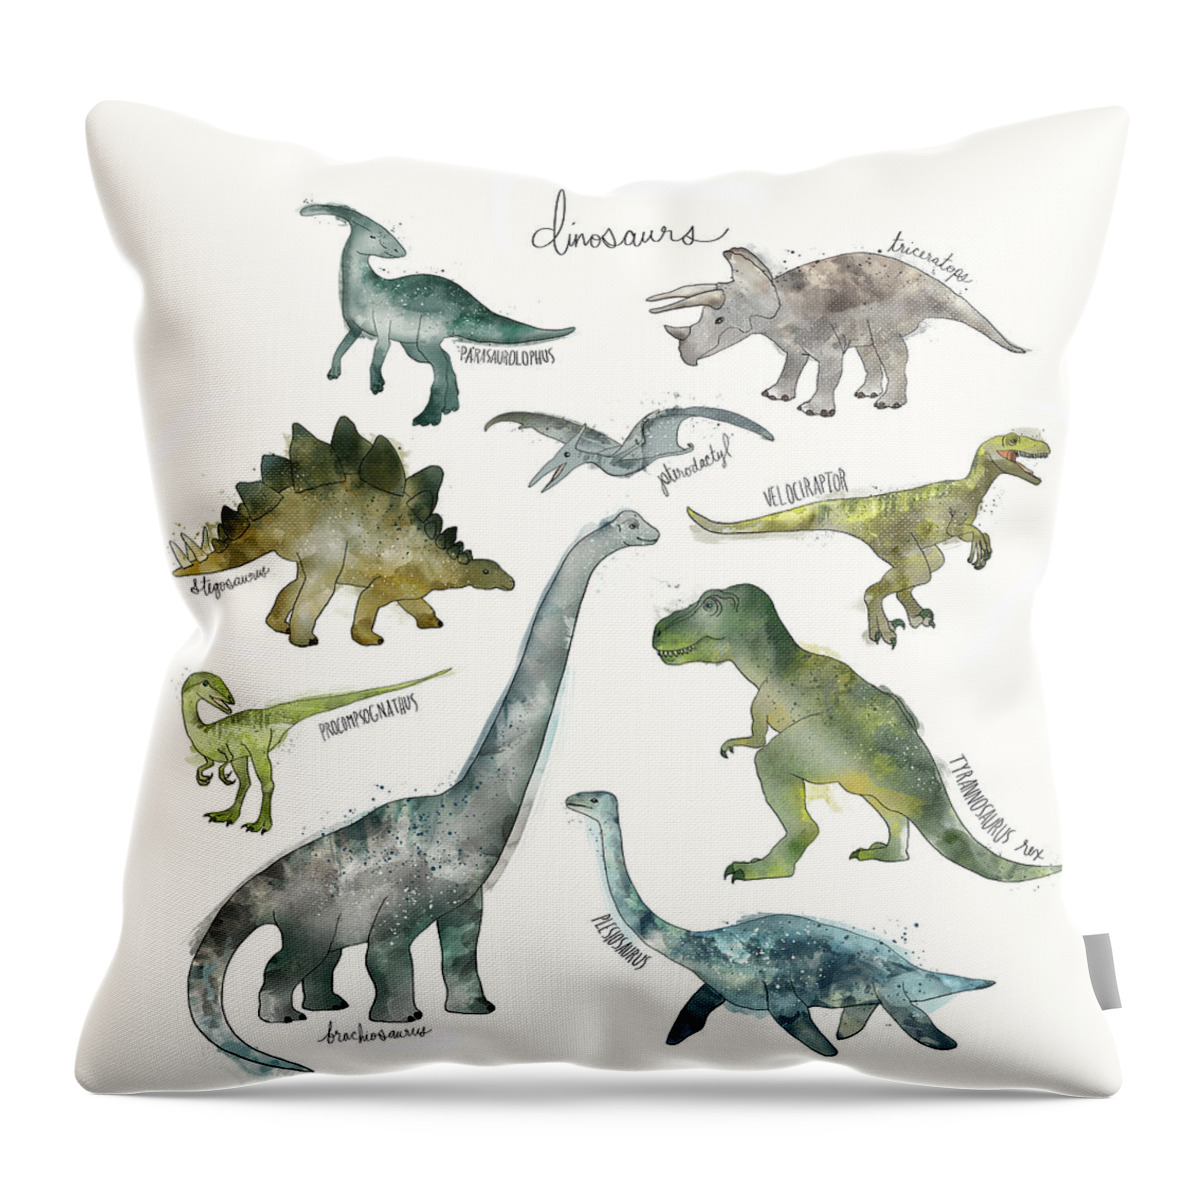 Dinosaurs Throw Pillow featuring the painting Dinosaurs by Amy Hamilton